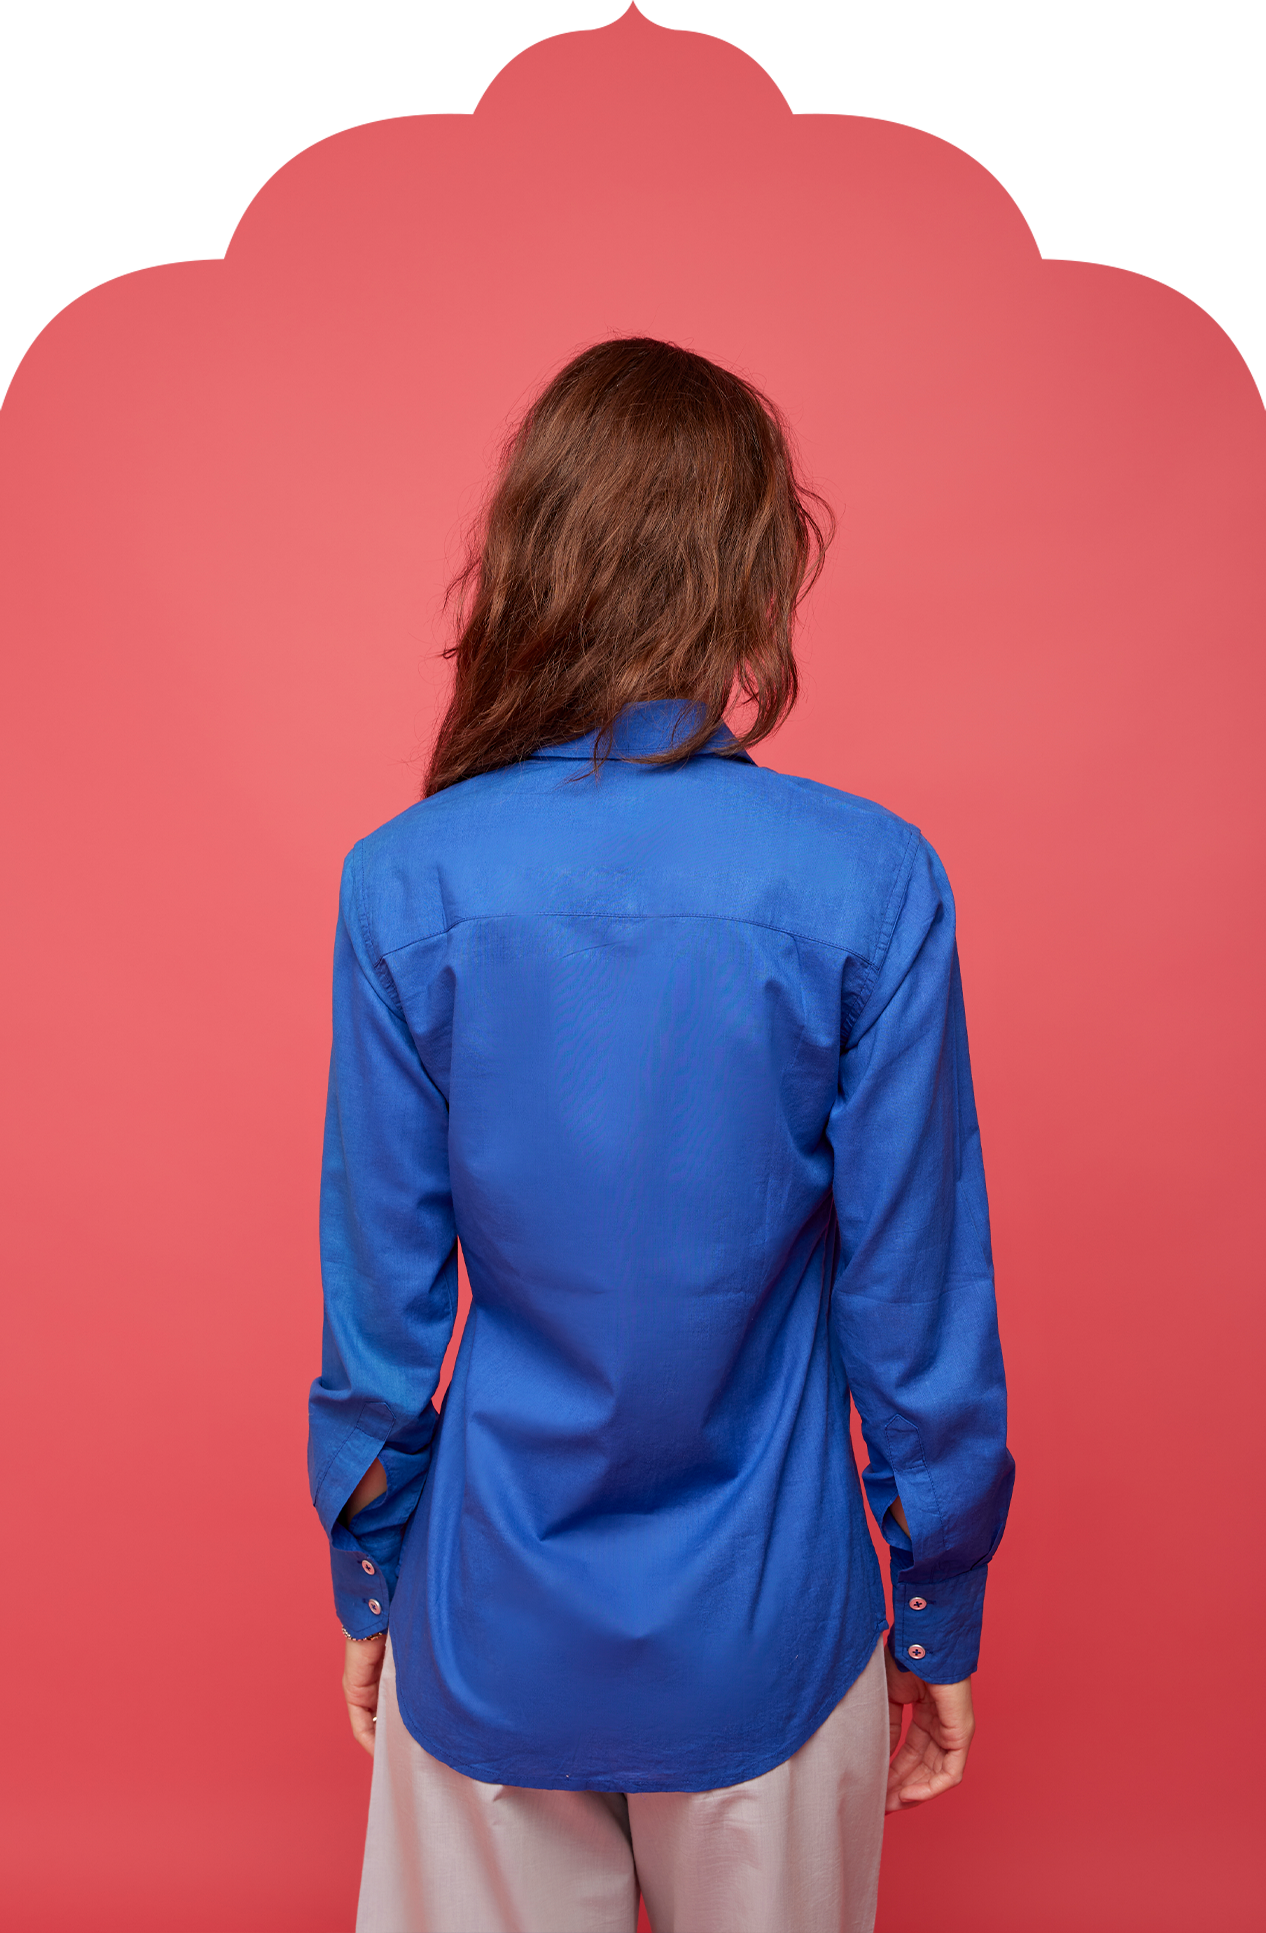 Women's Royal Blue Shirt with Jaali Detail